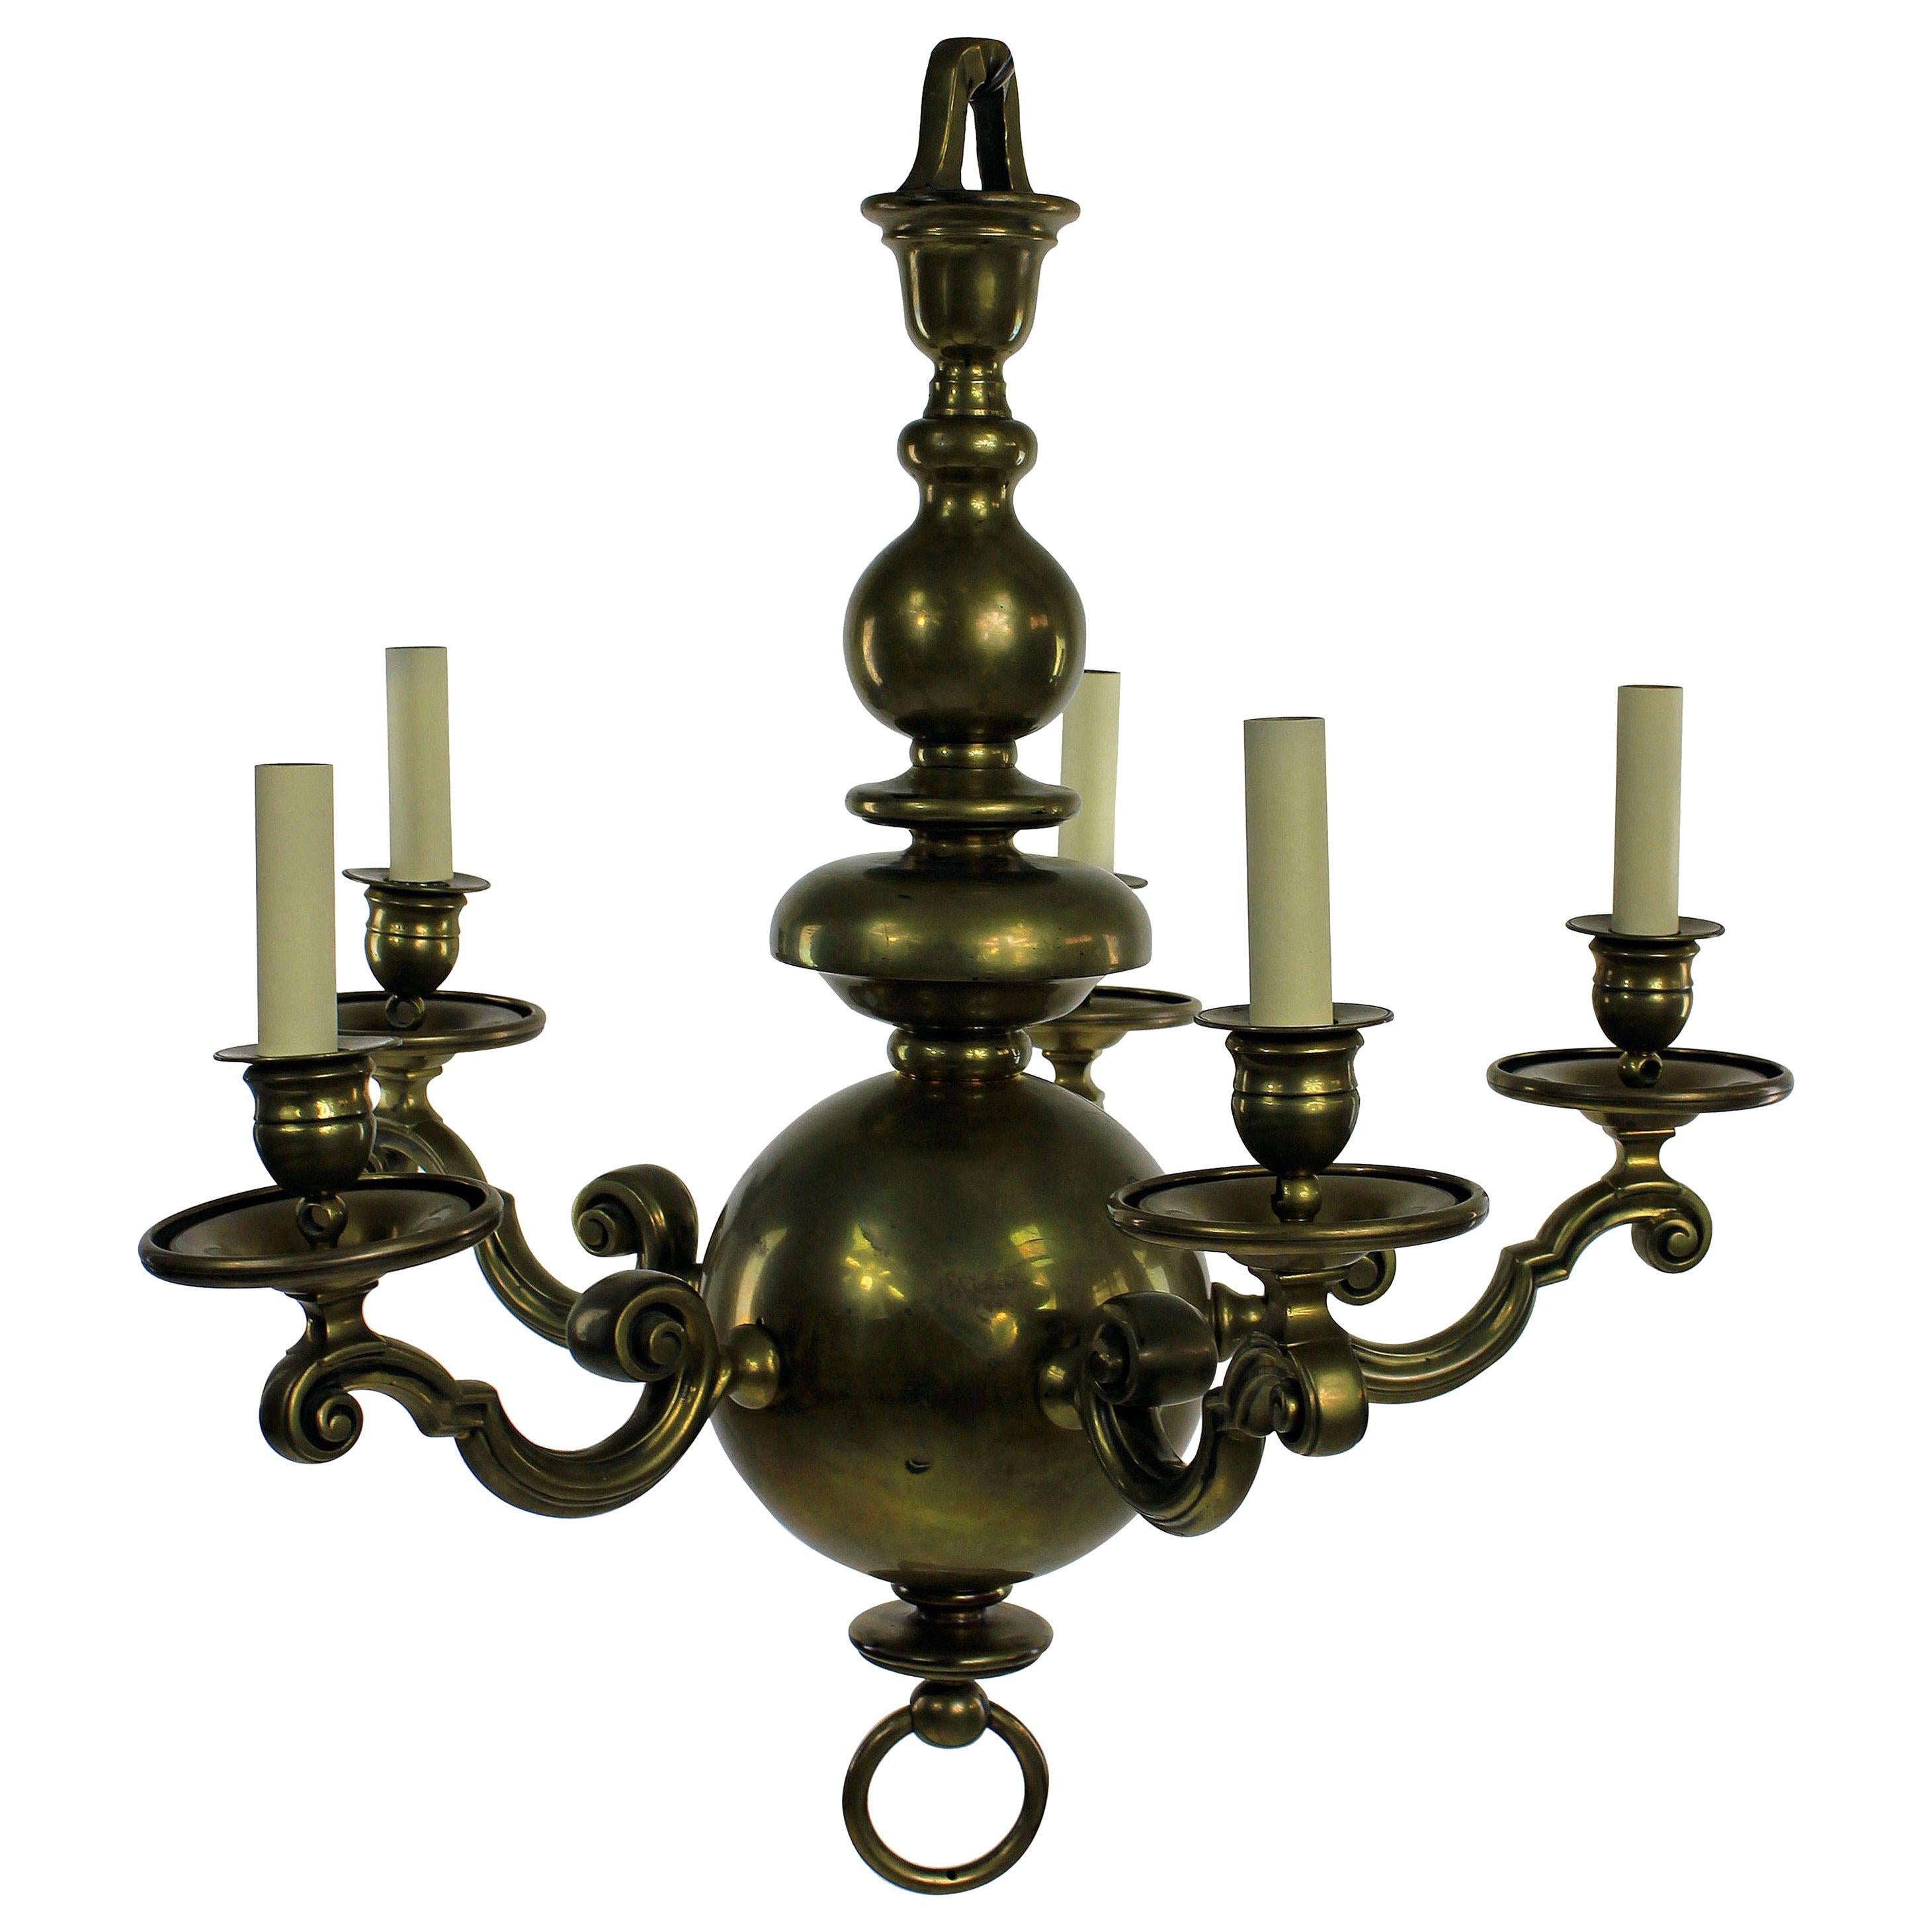 Early 19th Century Flemish Chandelier